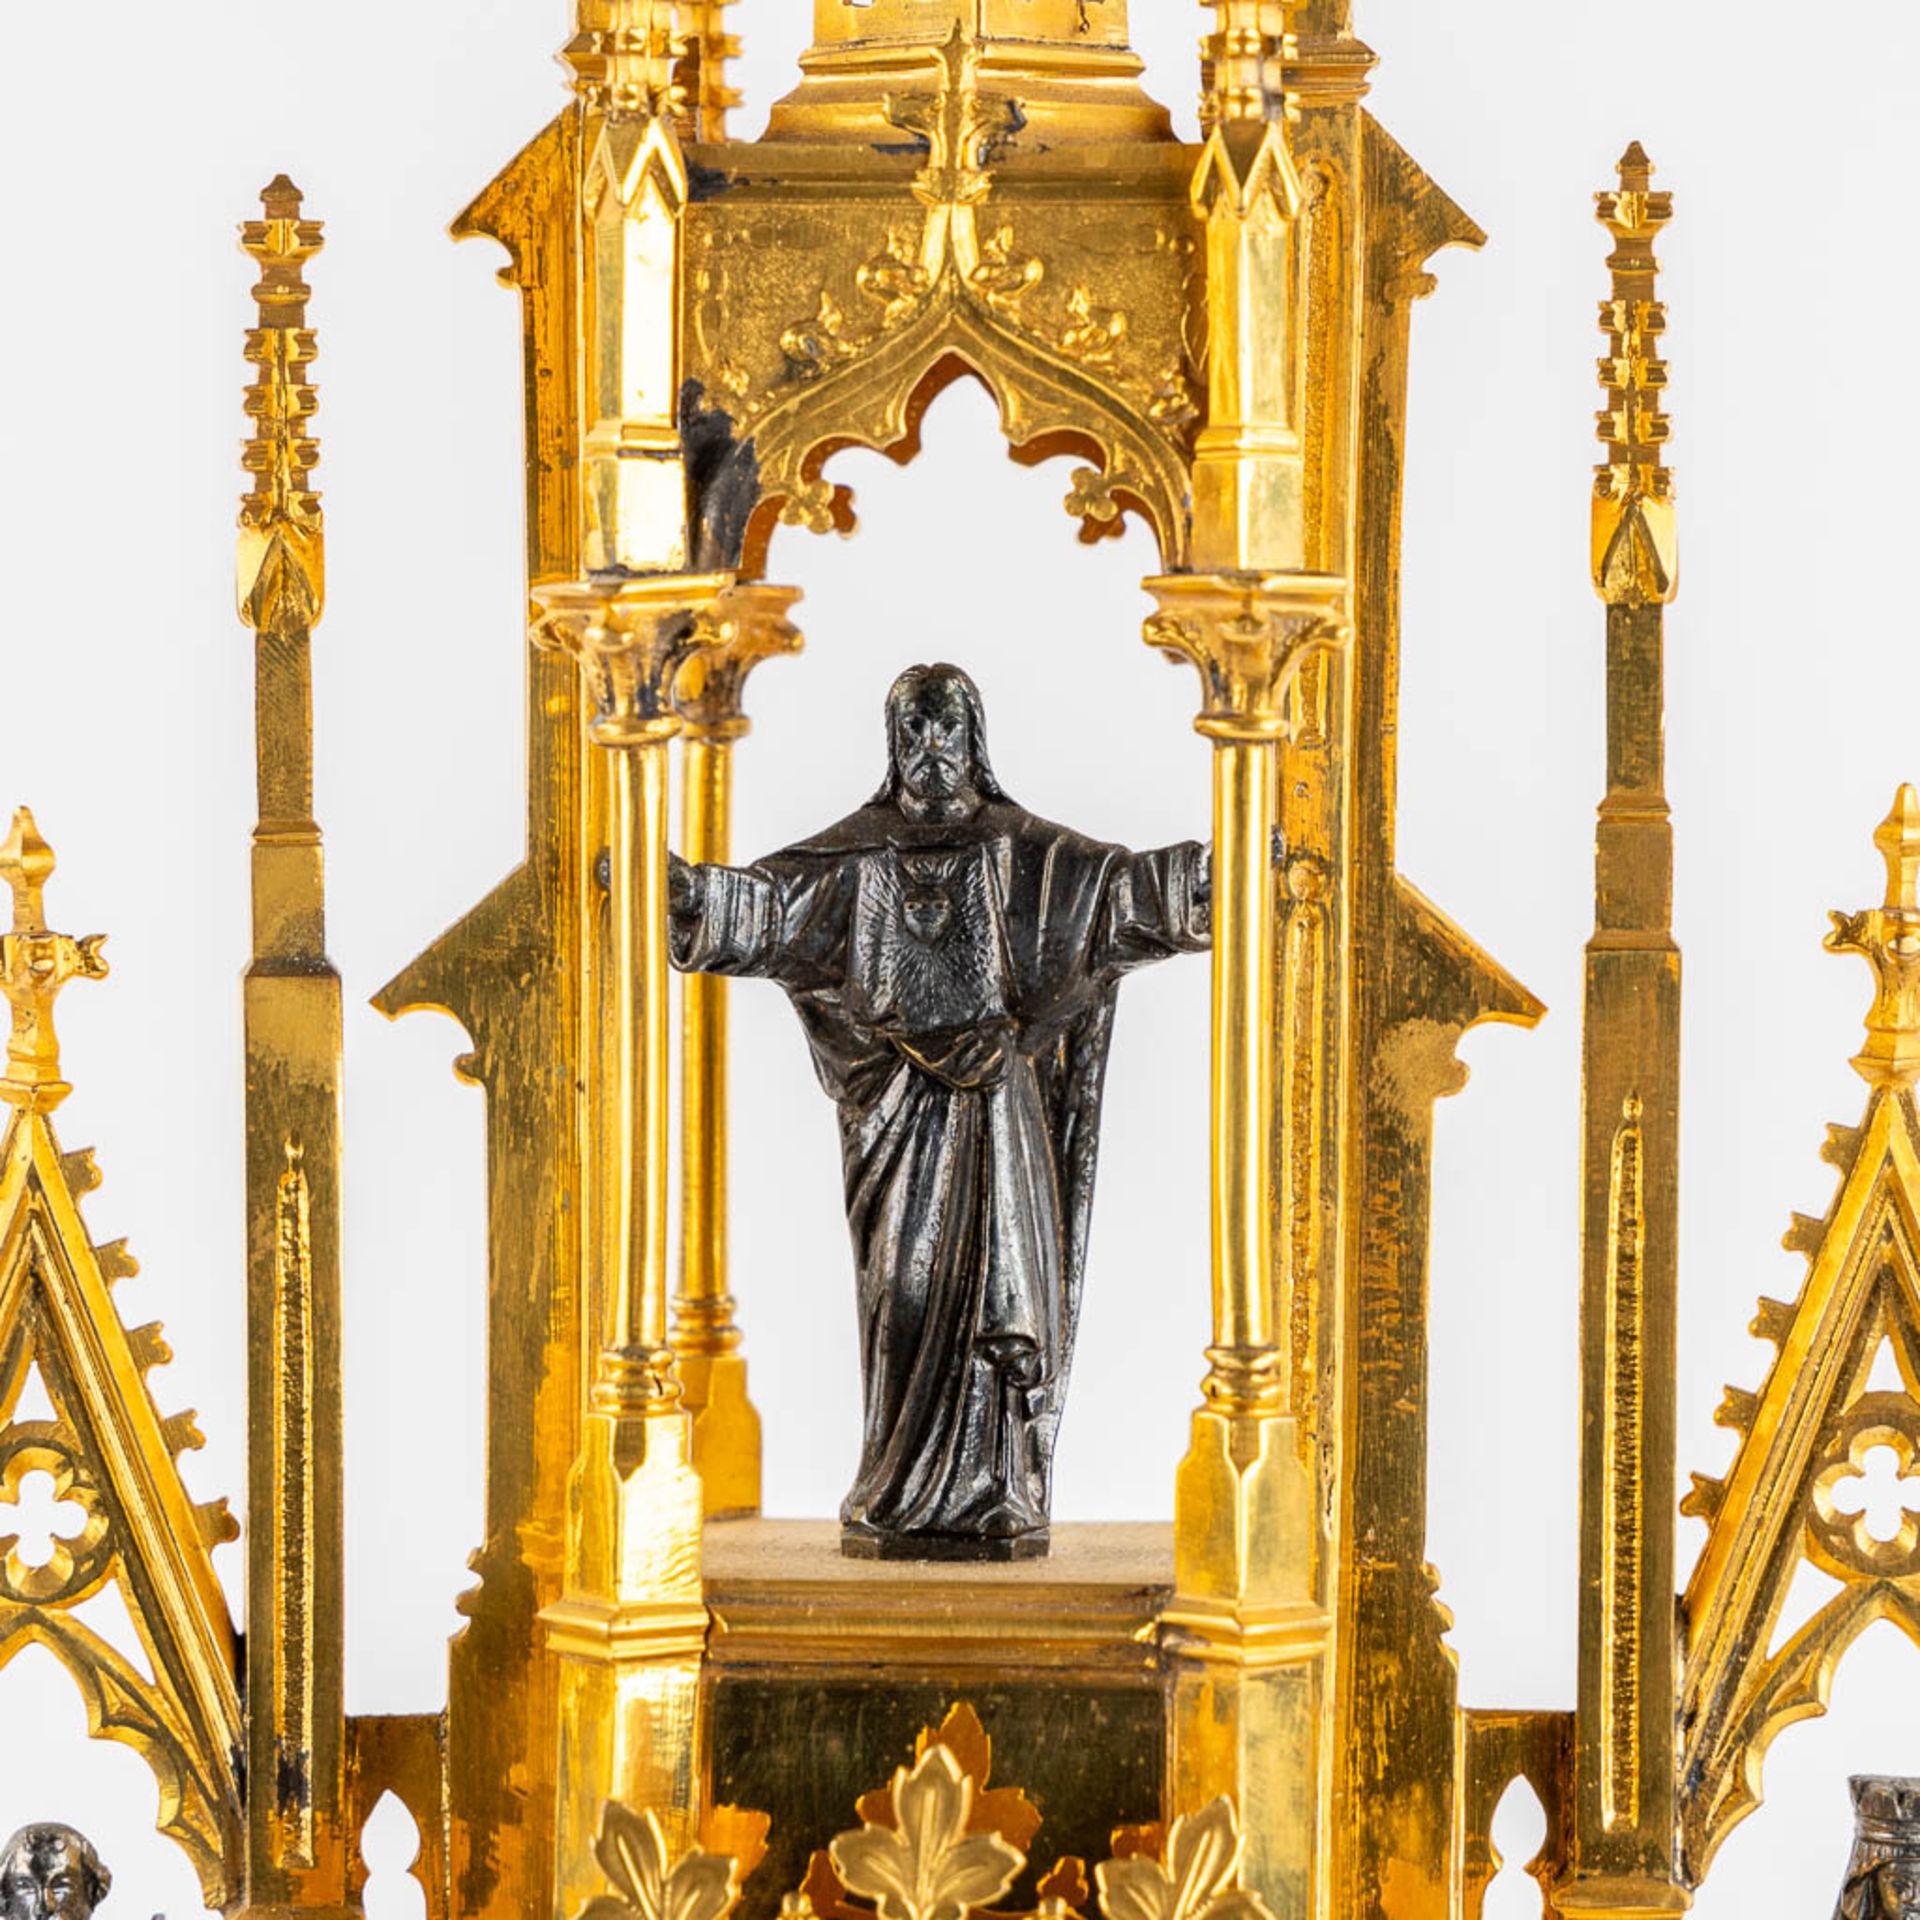 A Tower monstrance, gilt and silver plated brass, Gothic Revival. 19th C. (W:21,5 x H:58 cm) - Image 13 of 22